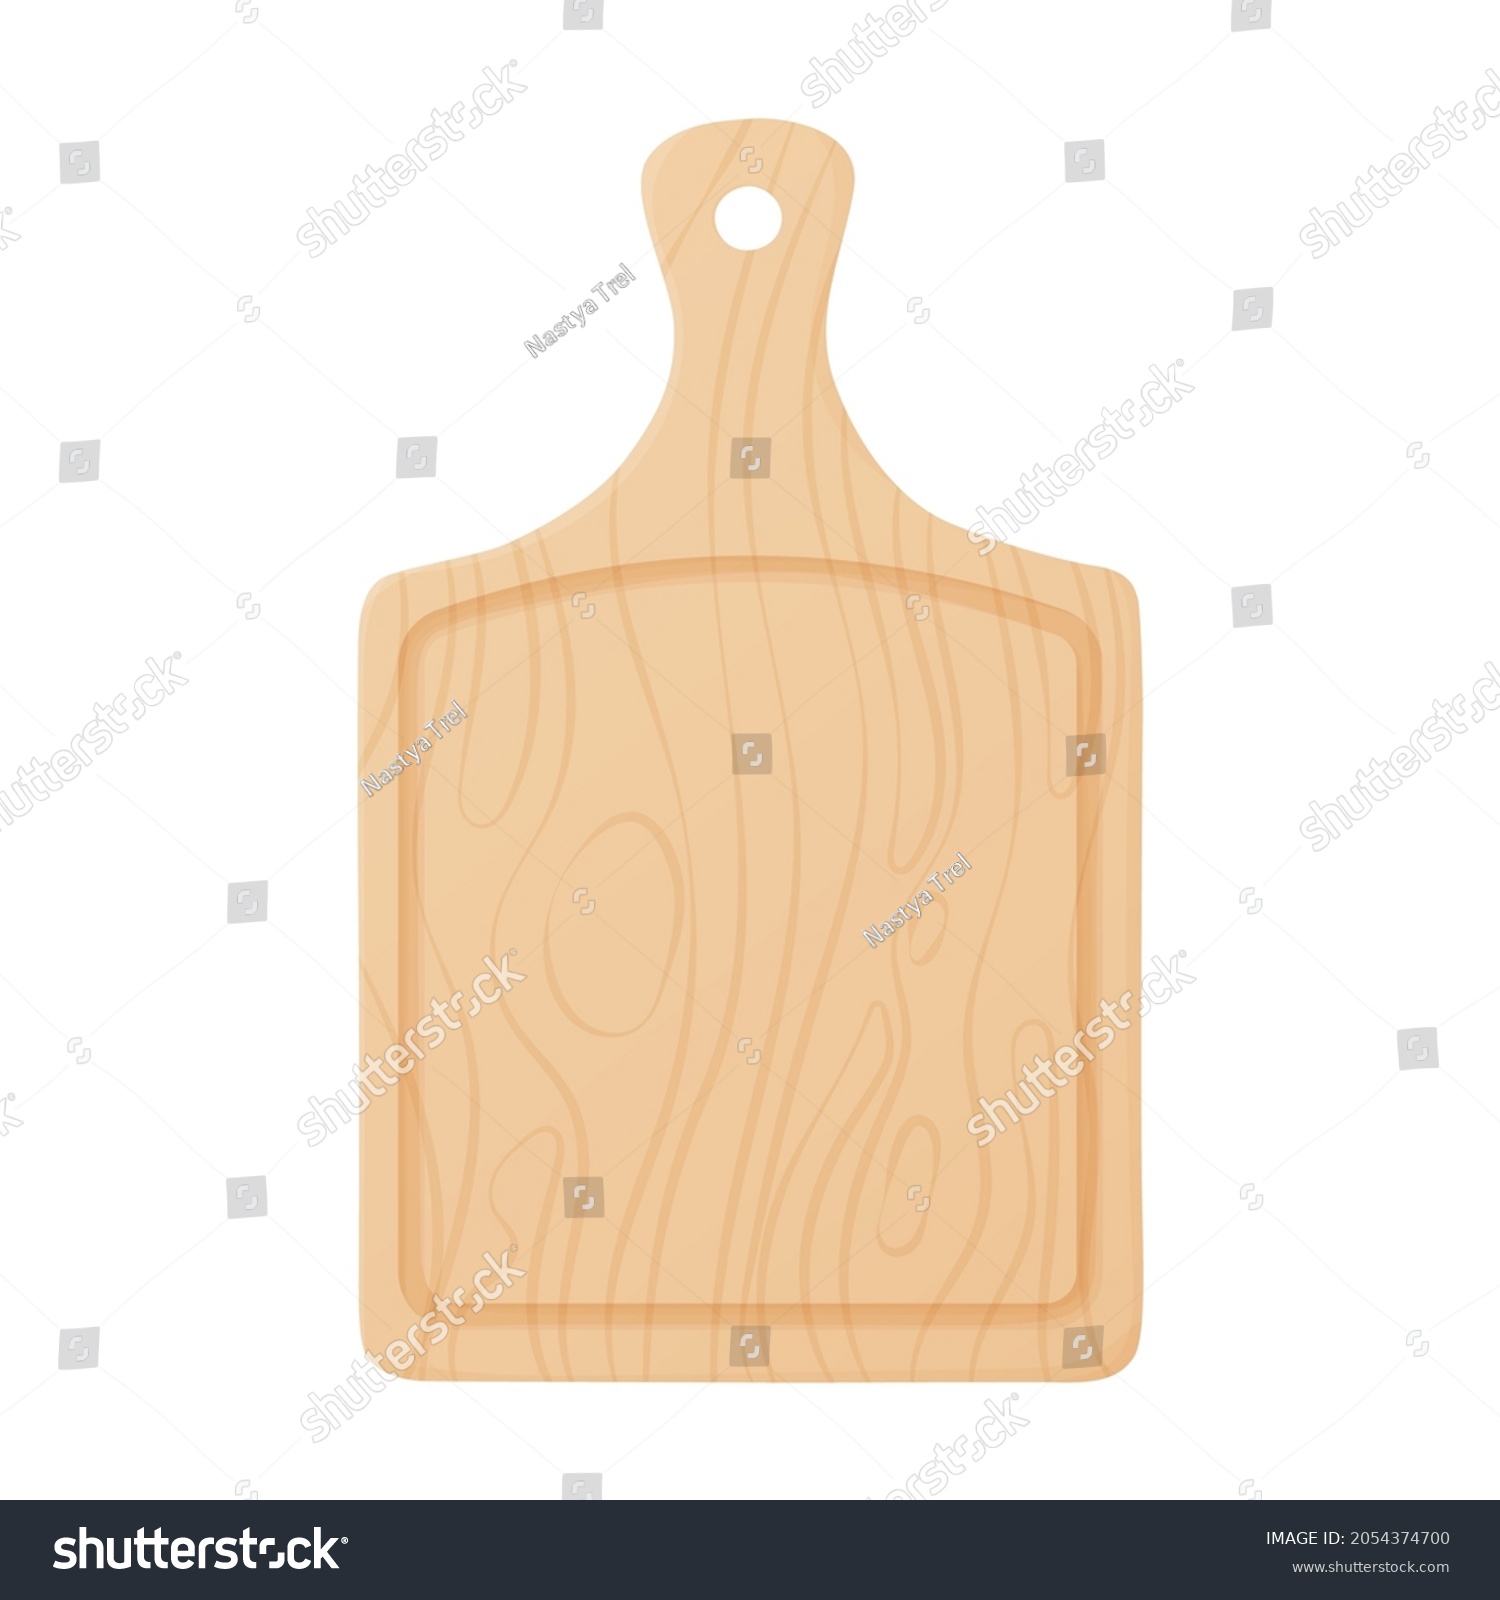 SVG of Wooden cutting board with a handle. Isolated illustration on a white background. svg